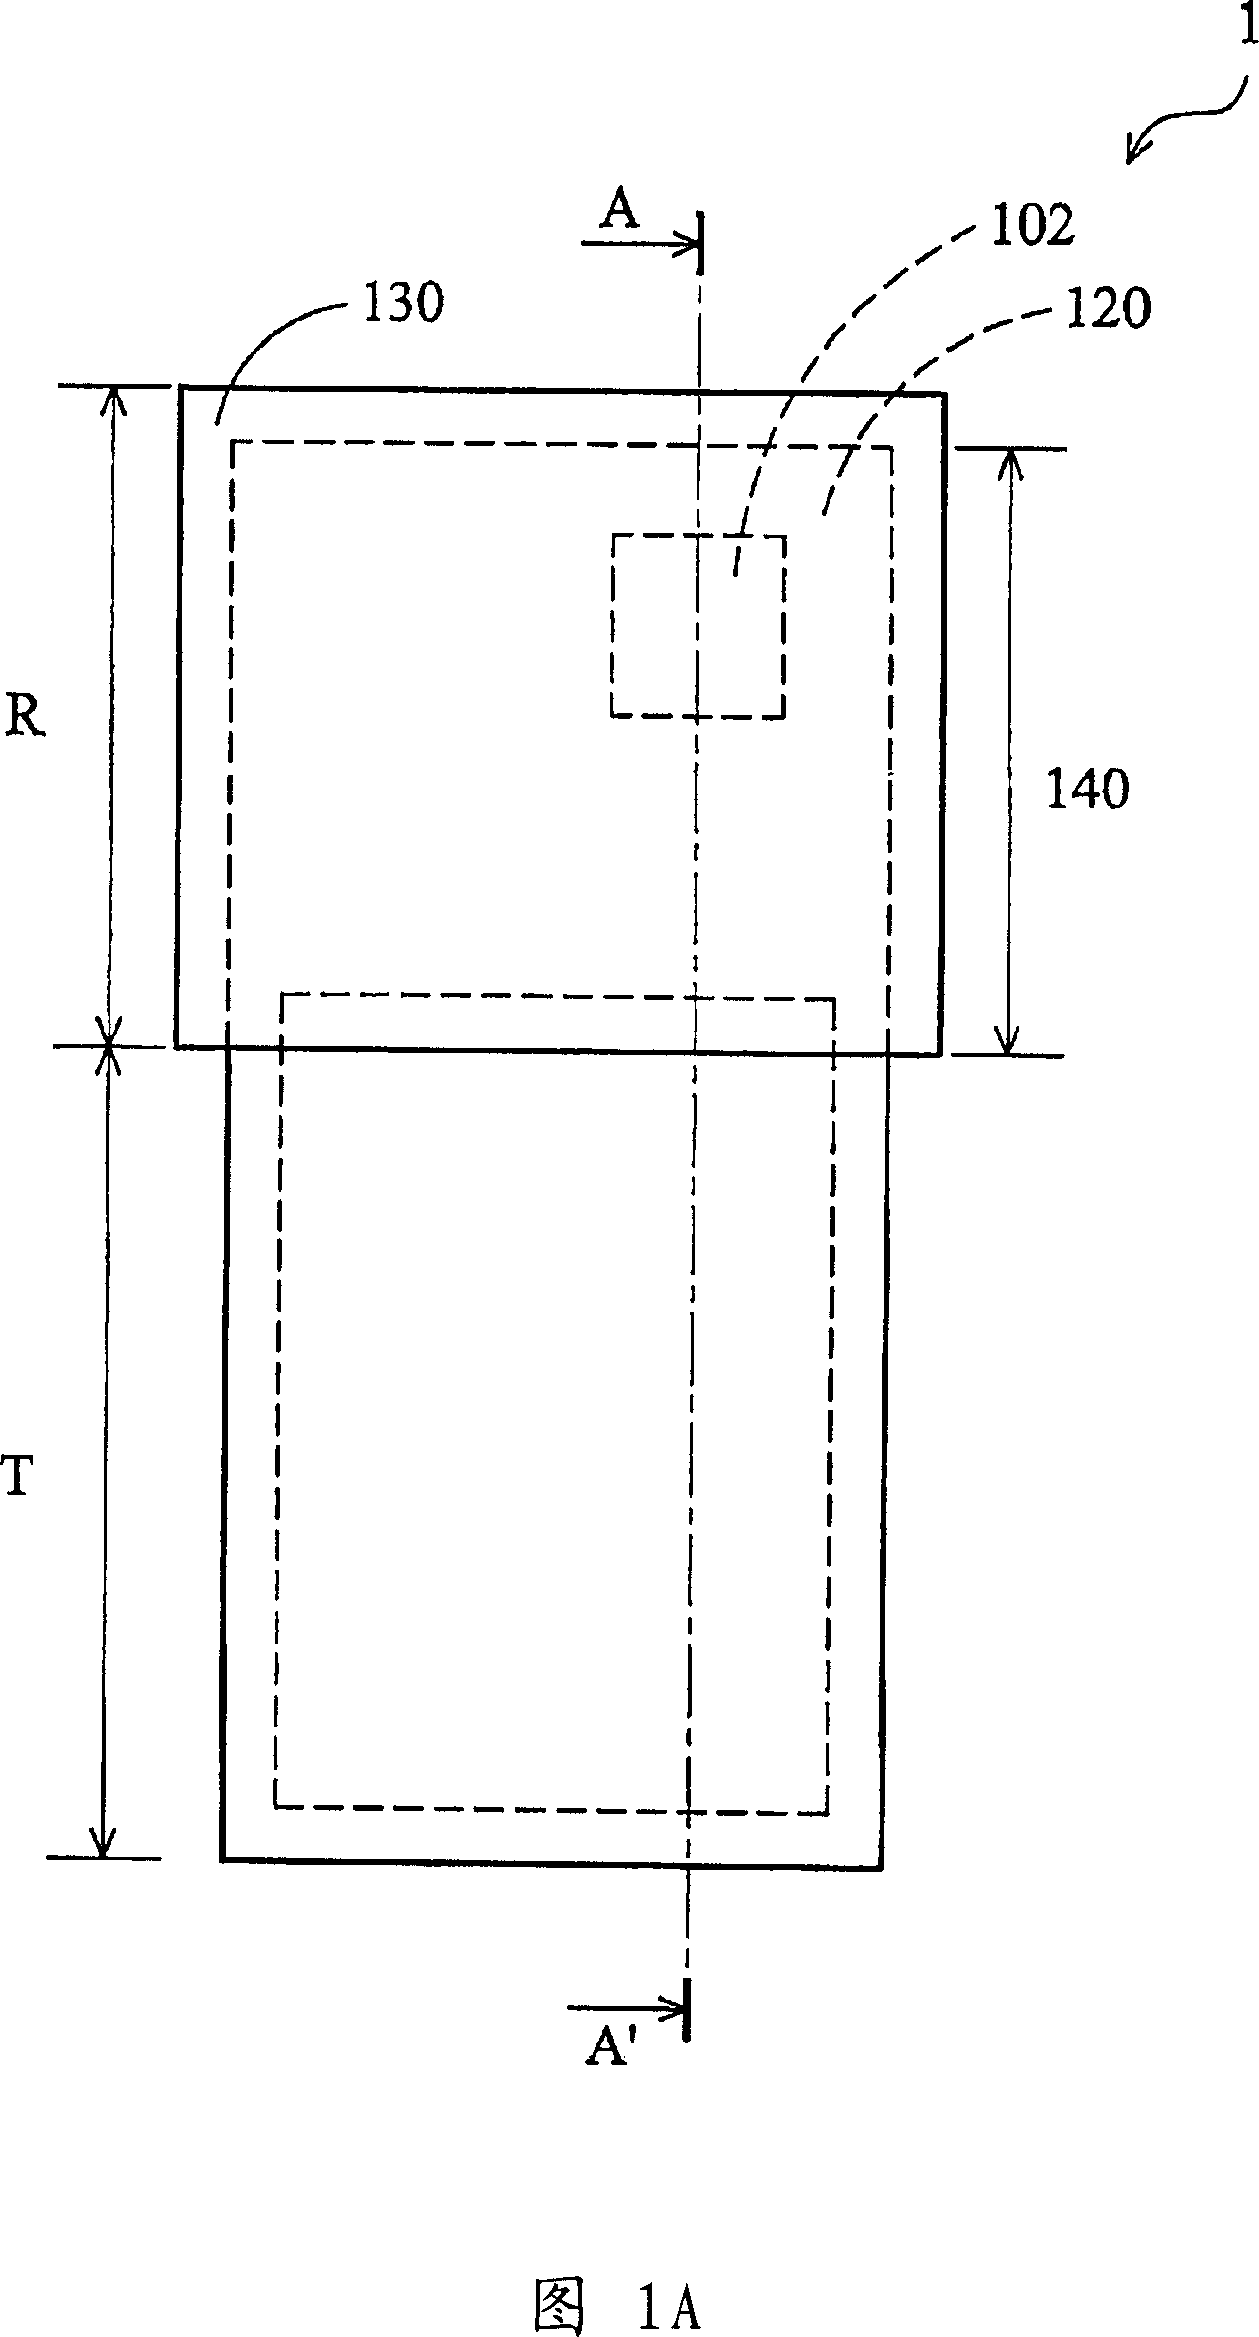 Systems for displaying images